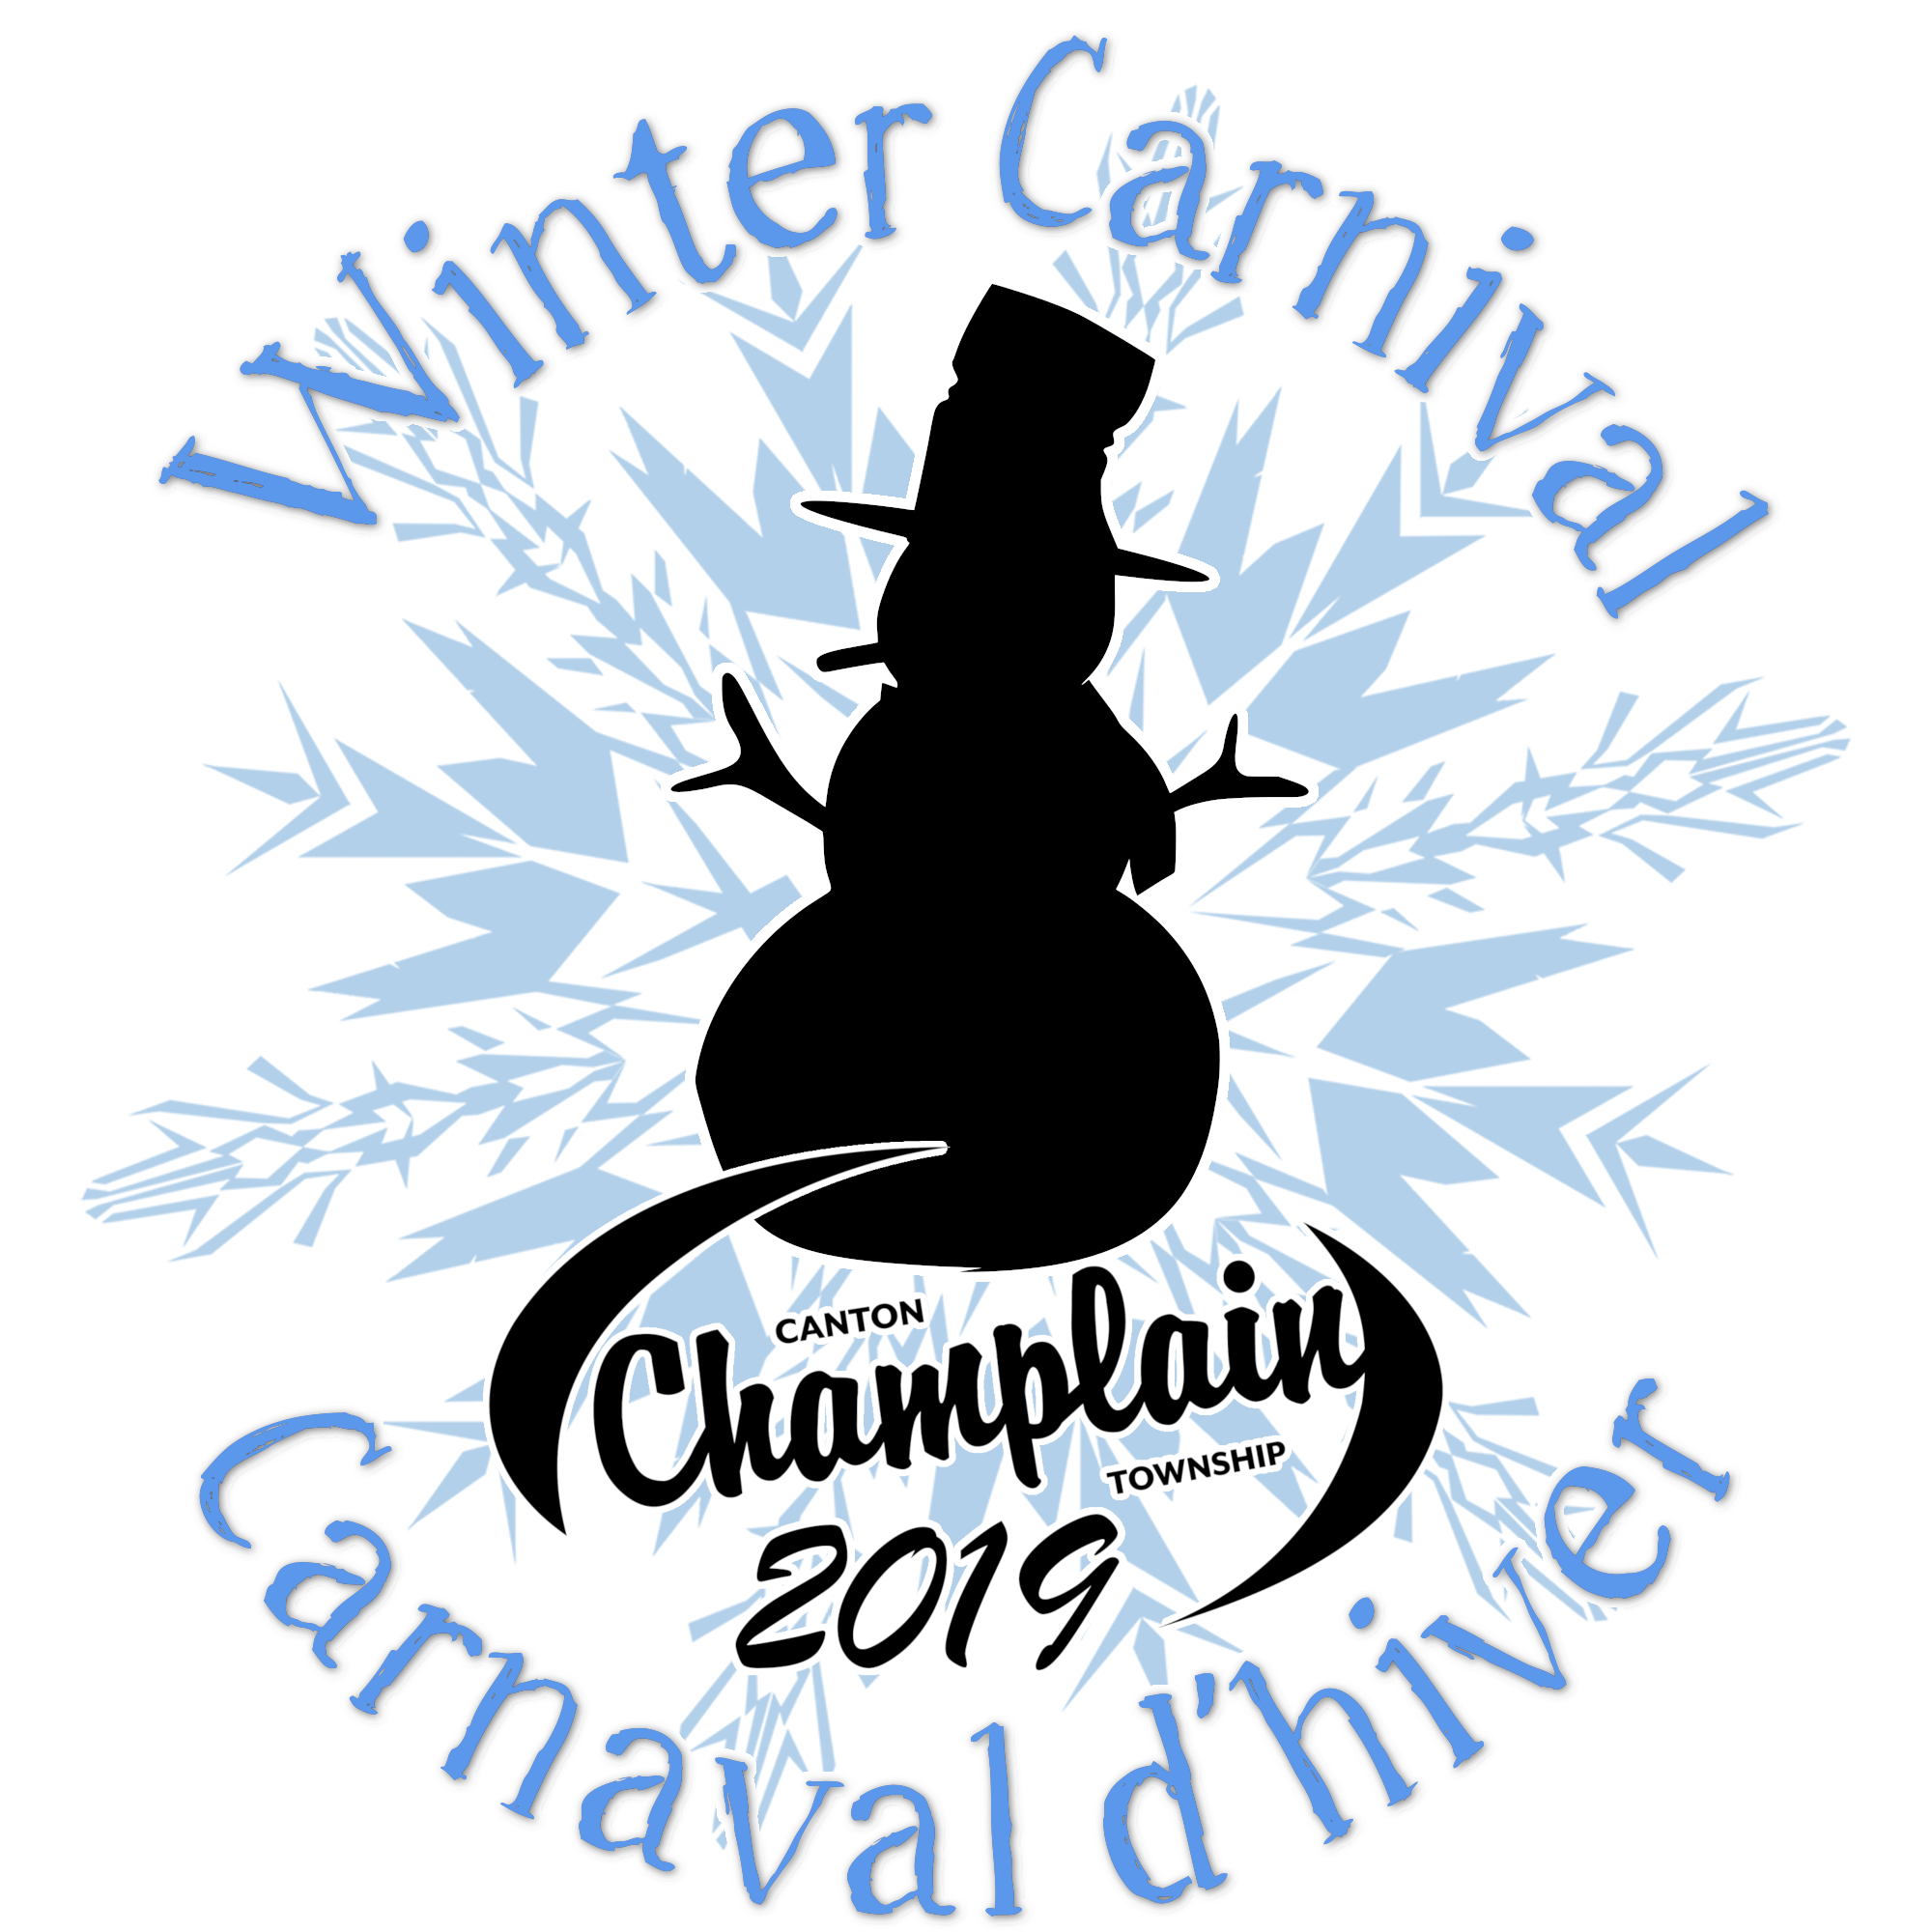 Champlain Winter Carnival – 2019 edition on February 9 and 10